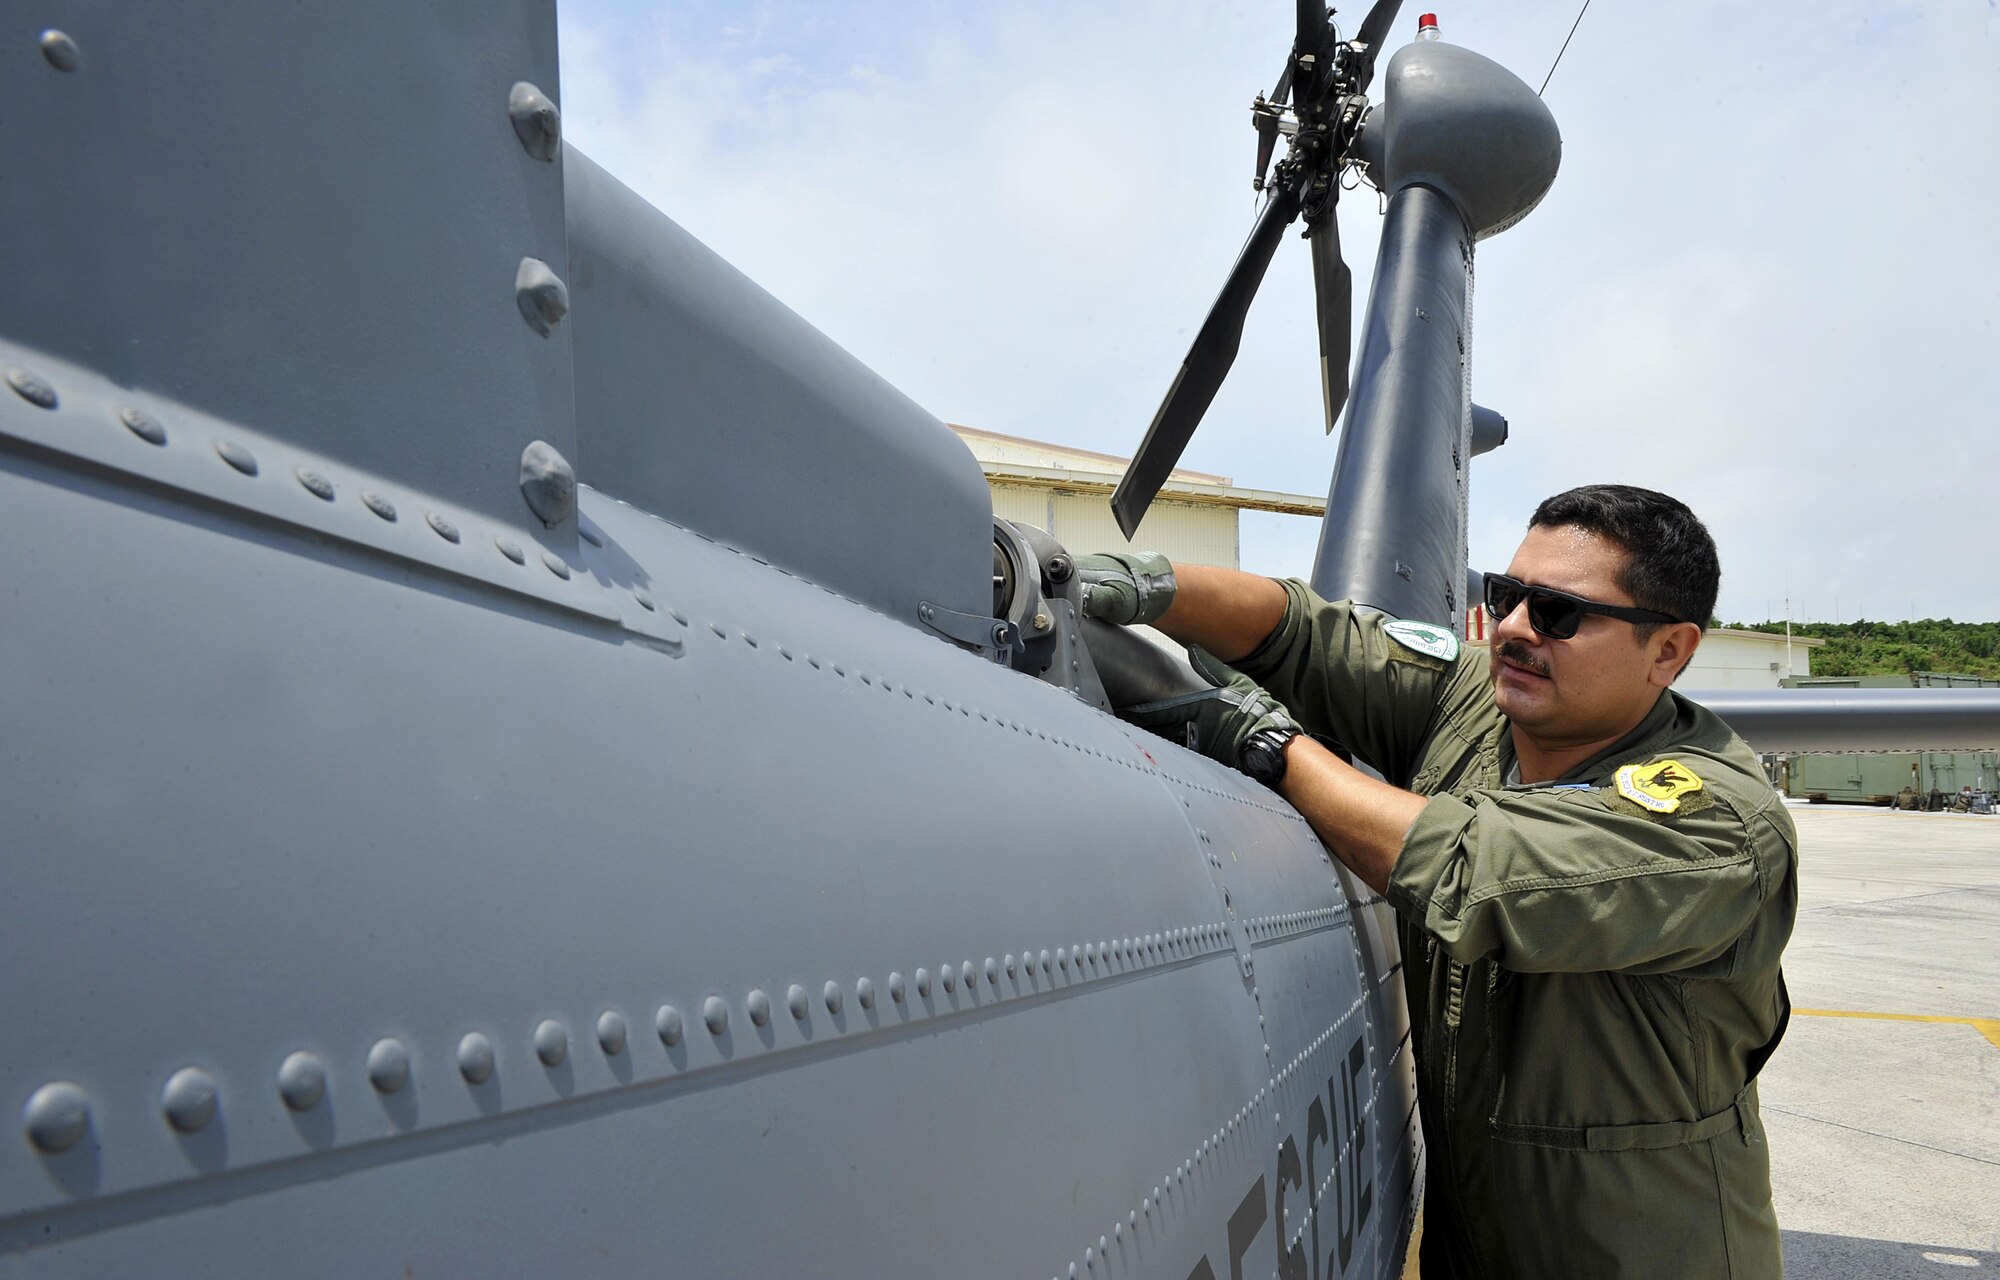 U.S. Air Force Senior Airman Ricardo Tinoco, 33rd Helicopter Maintenance Unit special mission aviator, inspects a tail shift of an HH-60G Pave Hawk helicopter during a pre-flight inspection, April 26, 2016, at Kadena Air Base, Japan. The preflight inspection consists of a thorough inspection of the entire aircraft to ensure its capability to perform the mission safely and effectively. (U.S. Air Force photo by Naoto Anazawa)
